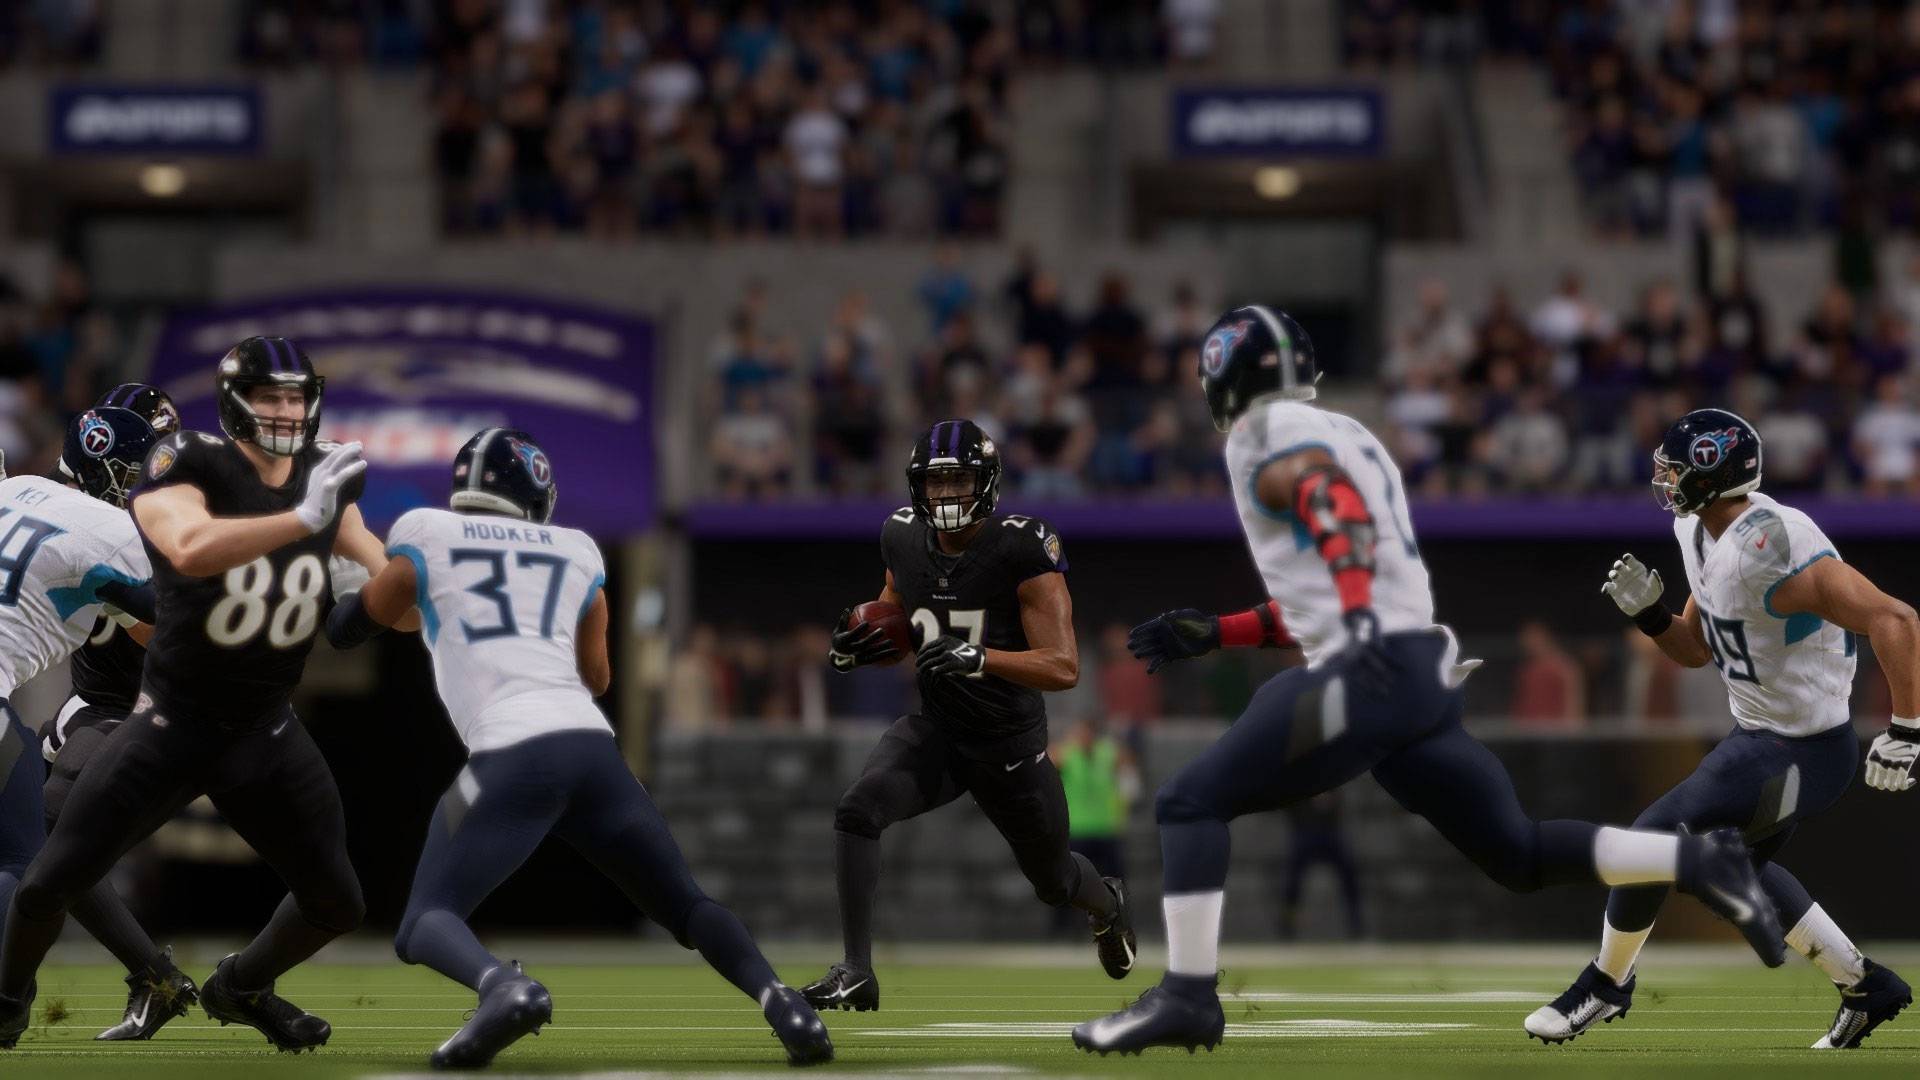 Madden NFL 24, PlayStation 5, Review, Gameplay, Screenshots, American Football, Sports Games, NoobFeed